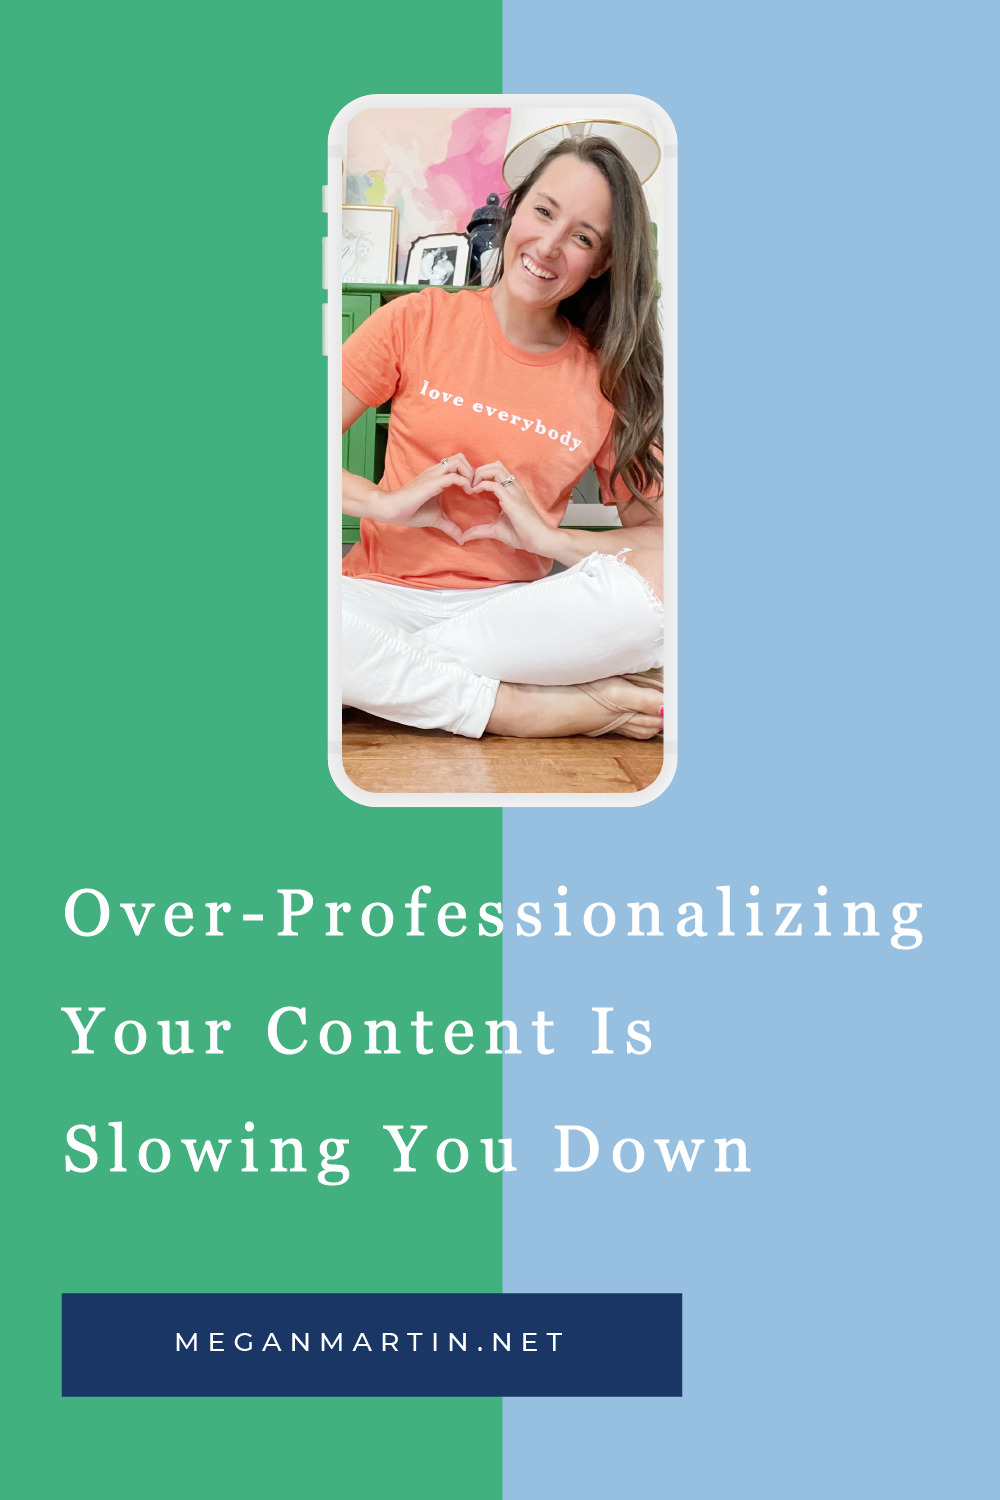 Over-Professionalizing Your Content Is Slowing You Down